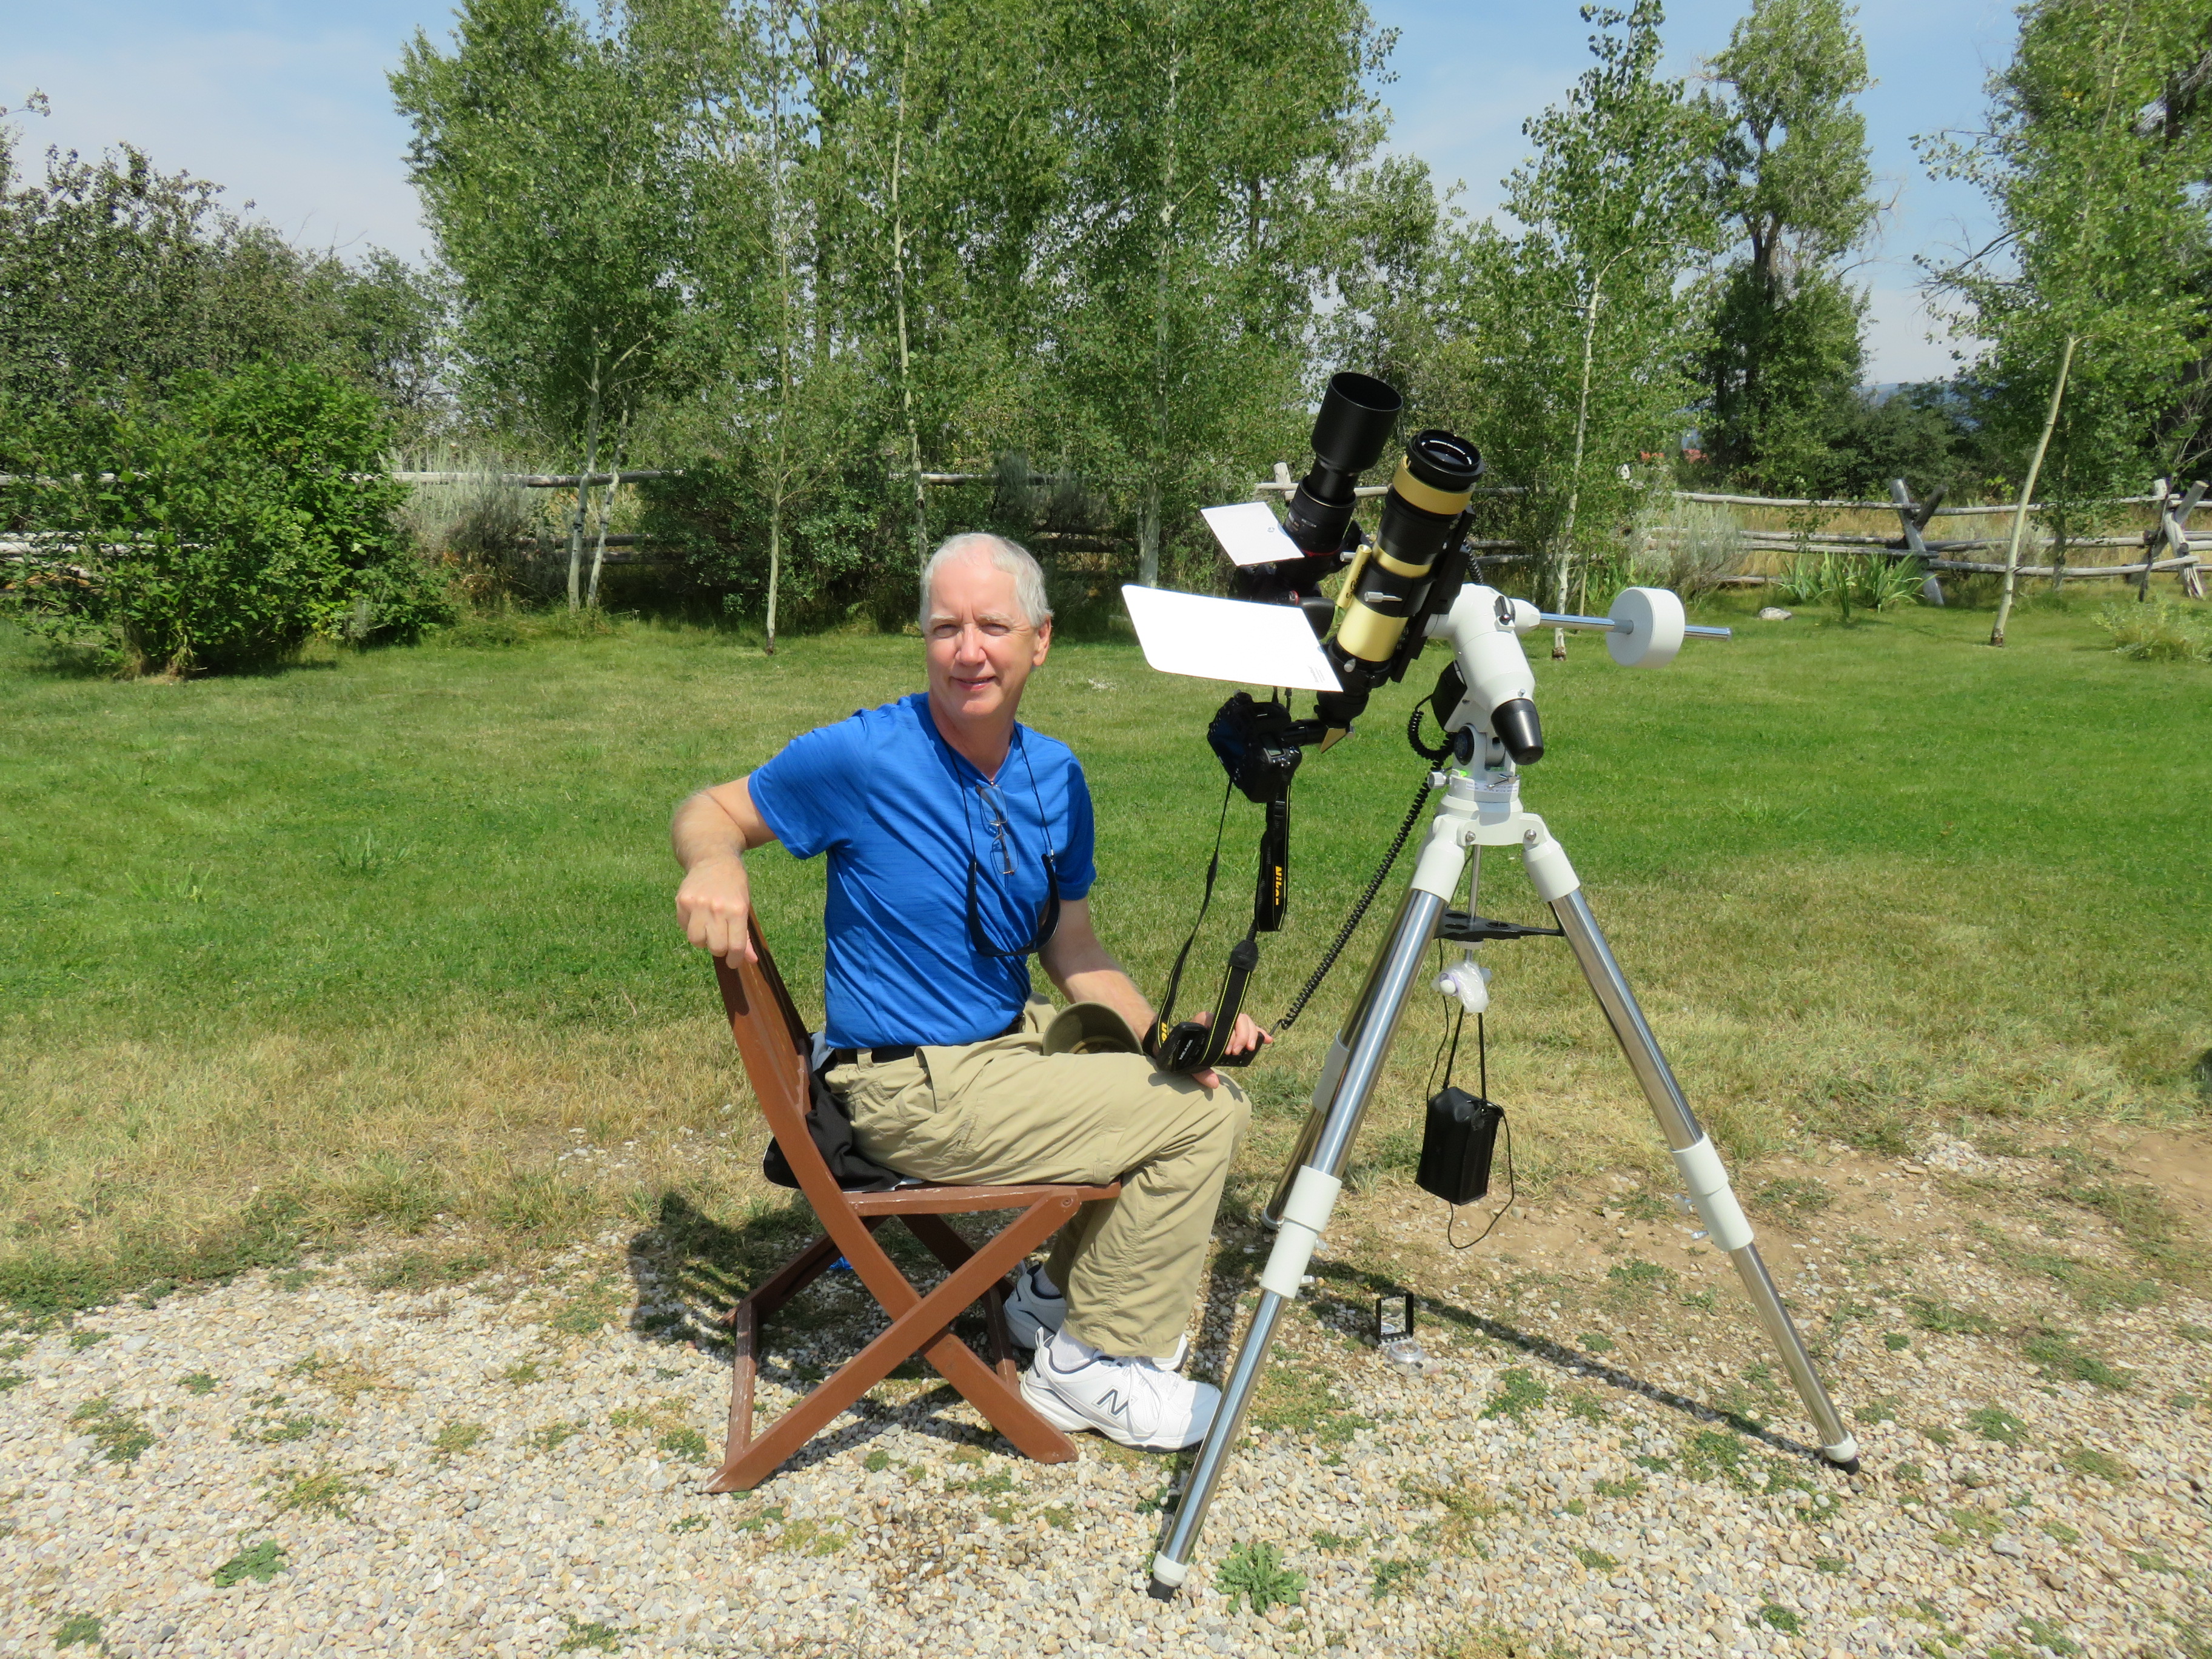 Brian Photographing Idaho Eclipse showing Equipment